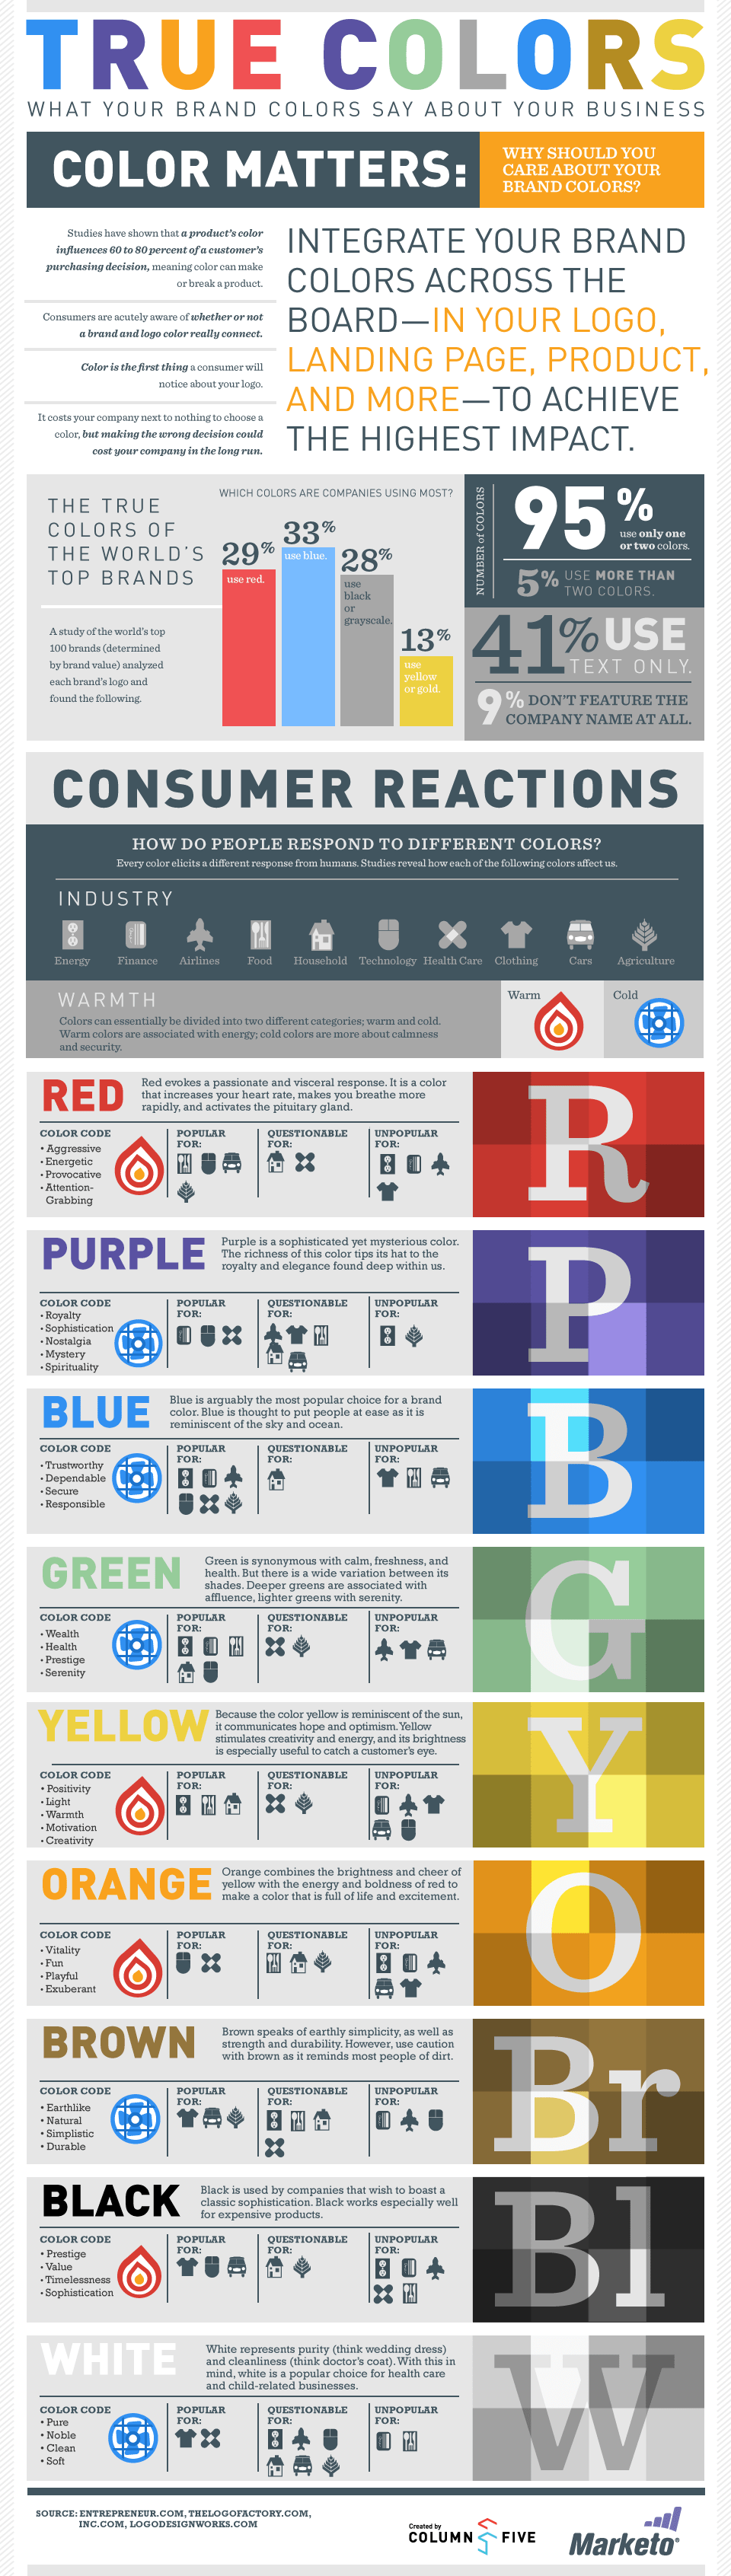 Top Colors for Logo - How to Choose the Color of Your Logo | Logo Design Blog | Logaster